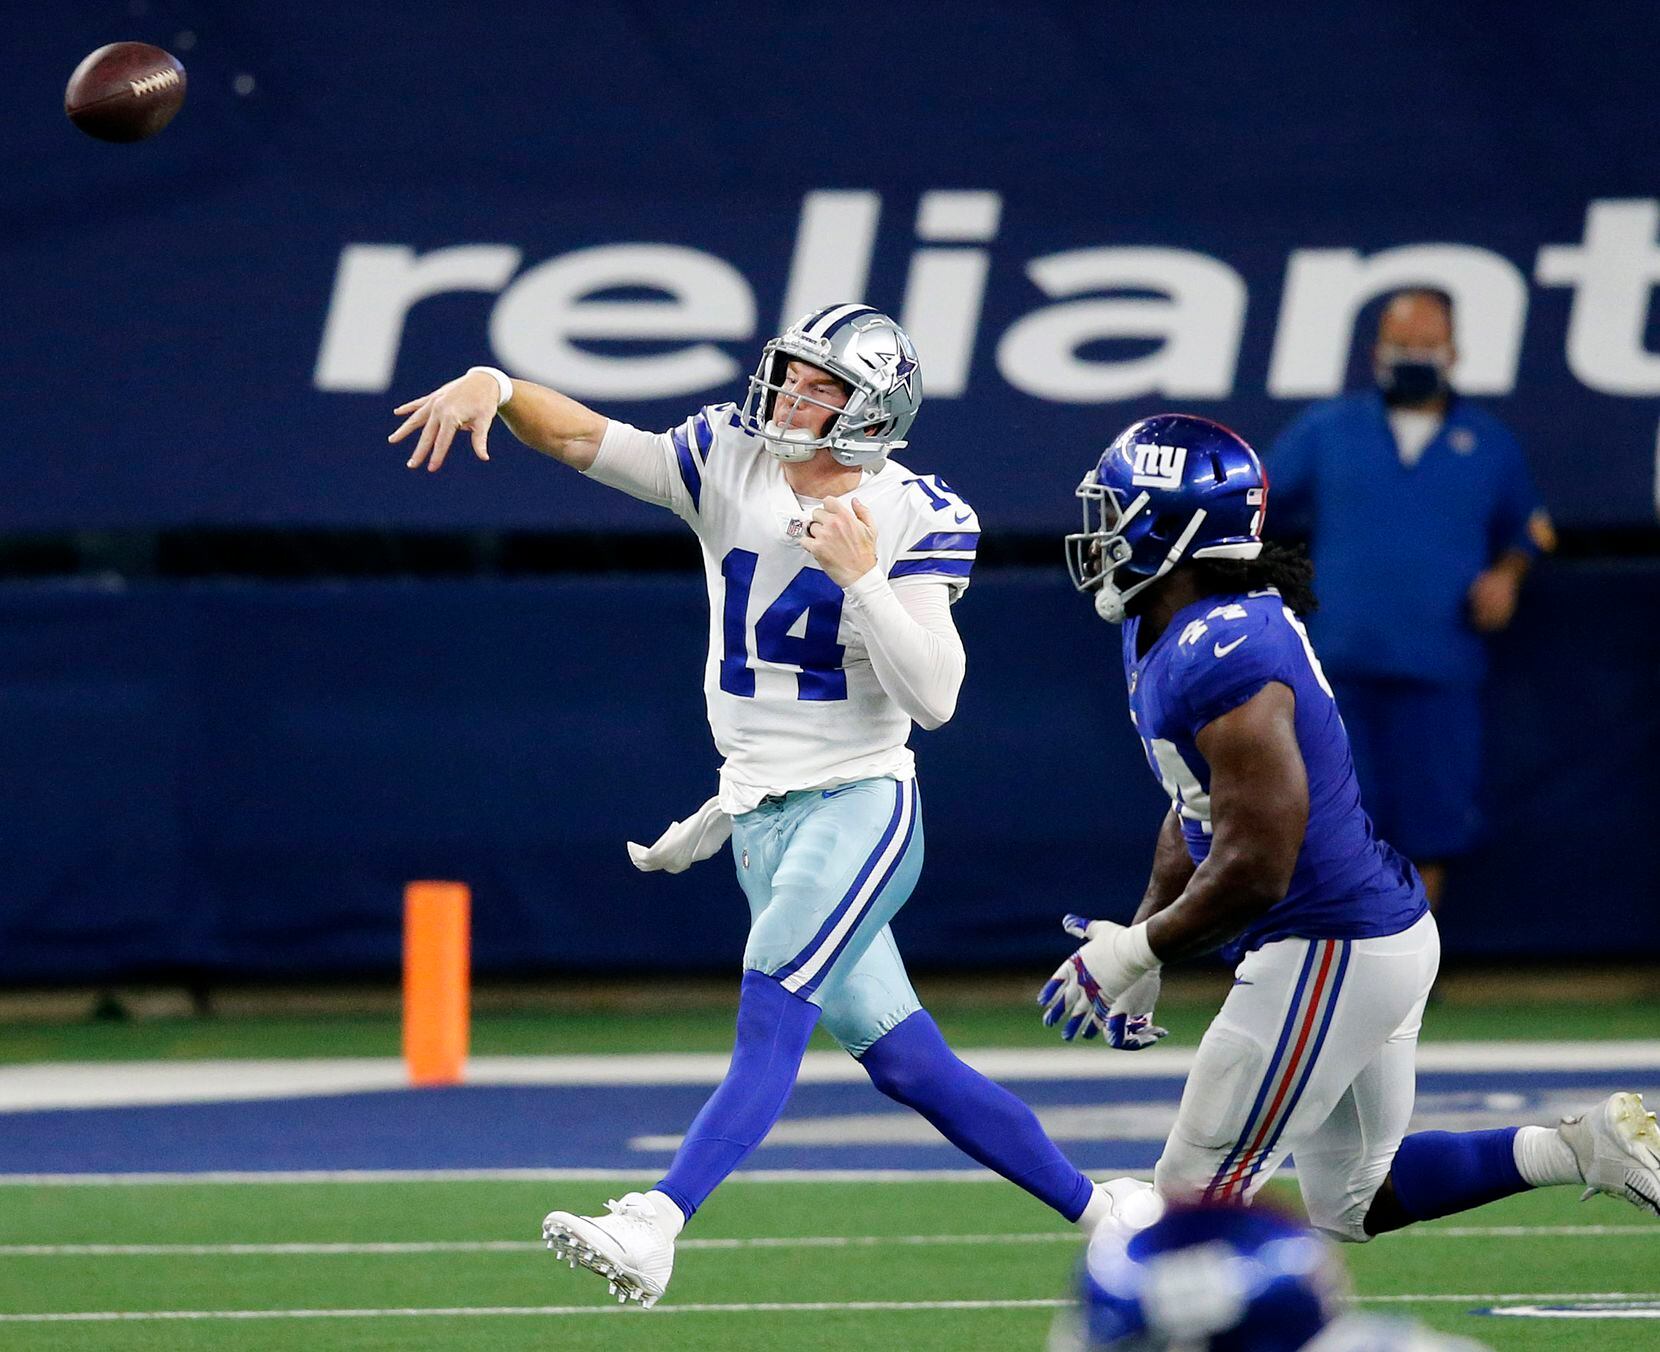 Dallas Cowboys quarterback Andy Dalton (14) tosses a pass on the run in the fourth quarter against the New York Giants at AT&T Stadium Stadium in Arlington, Texas, Sunday, October 11, 2020. The Cowboys defeated the Giants on a last second field goal, 37-34. (Tom Fox/The Dallas Morning News)